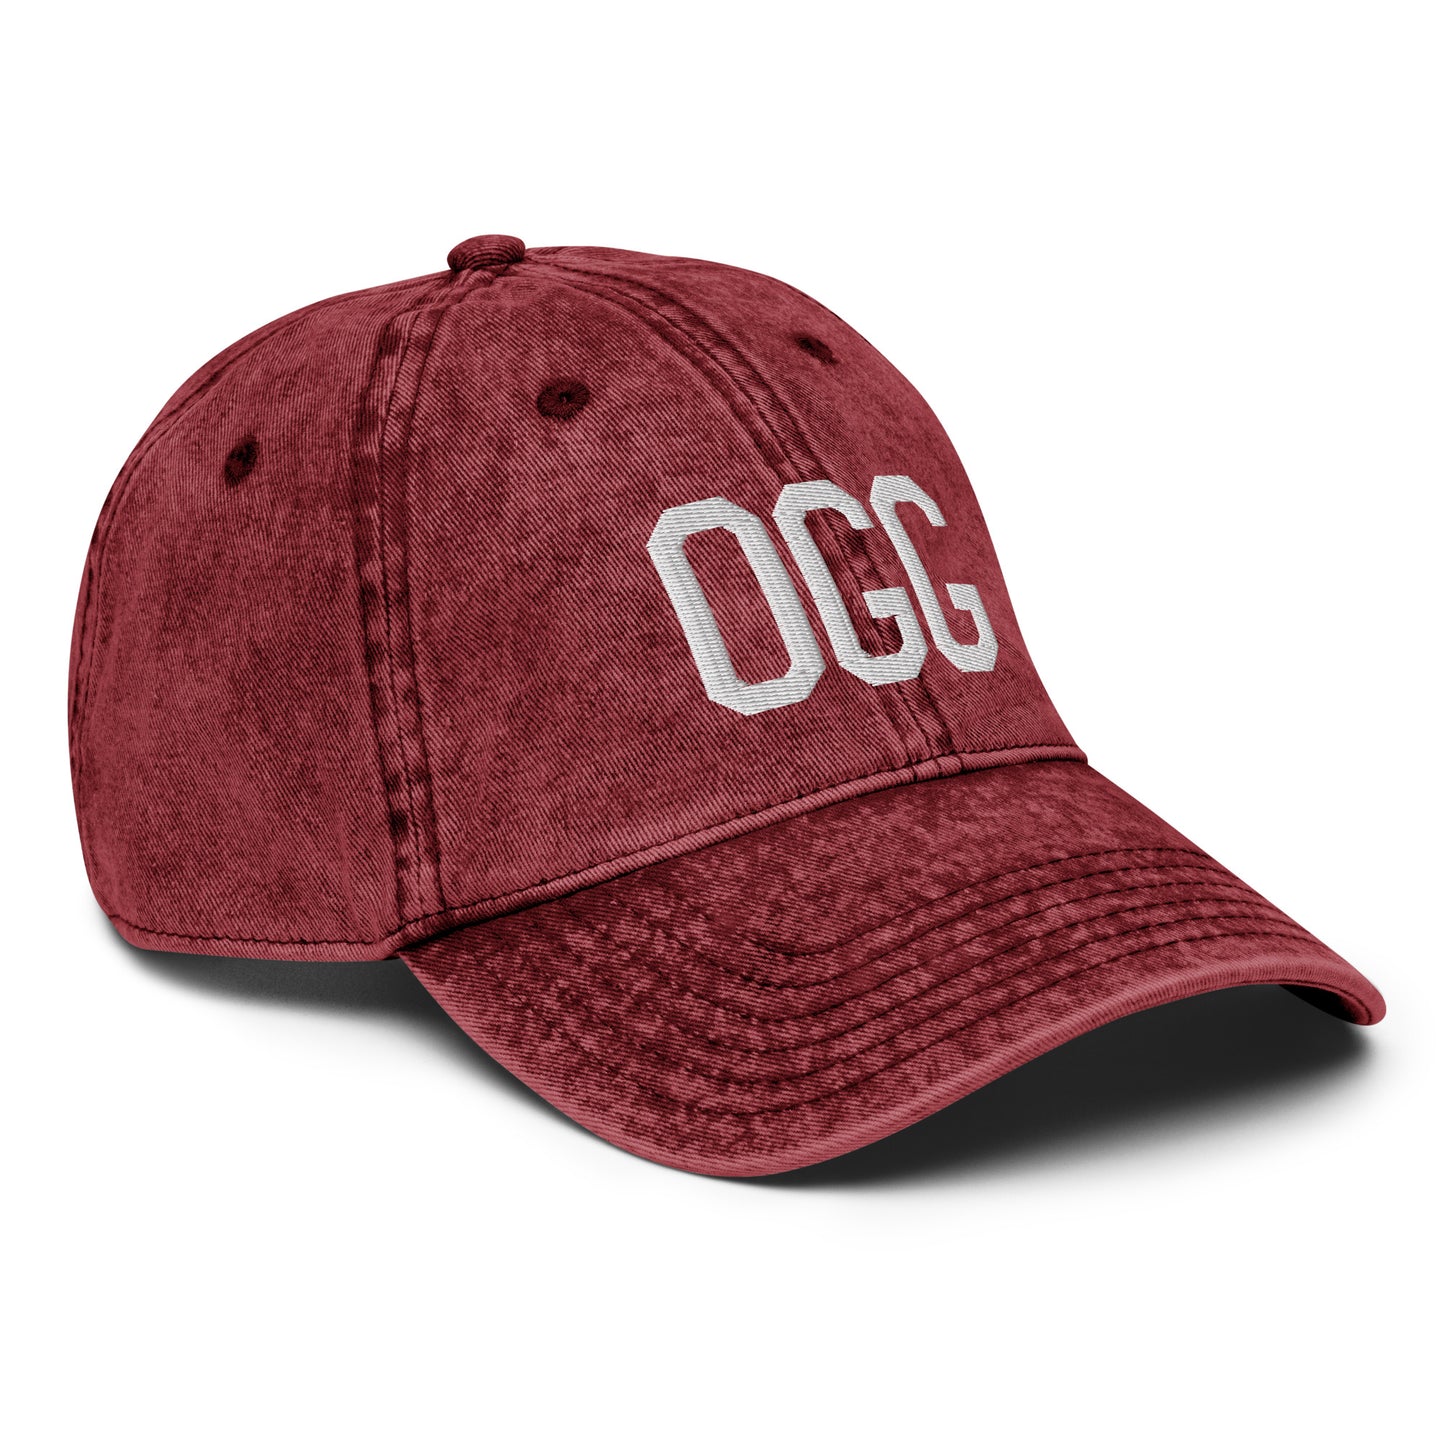 Airport Code Twill Cap - White • OGG Maui • YHM Designs - Image 21